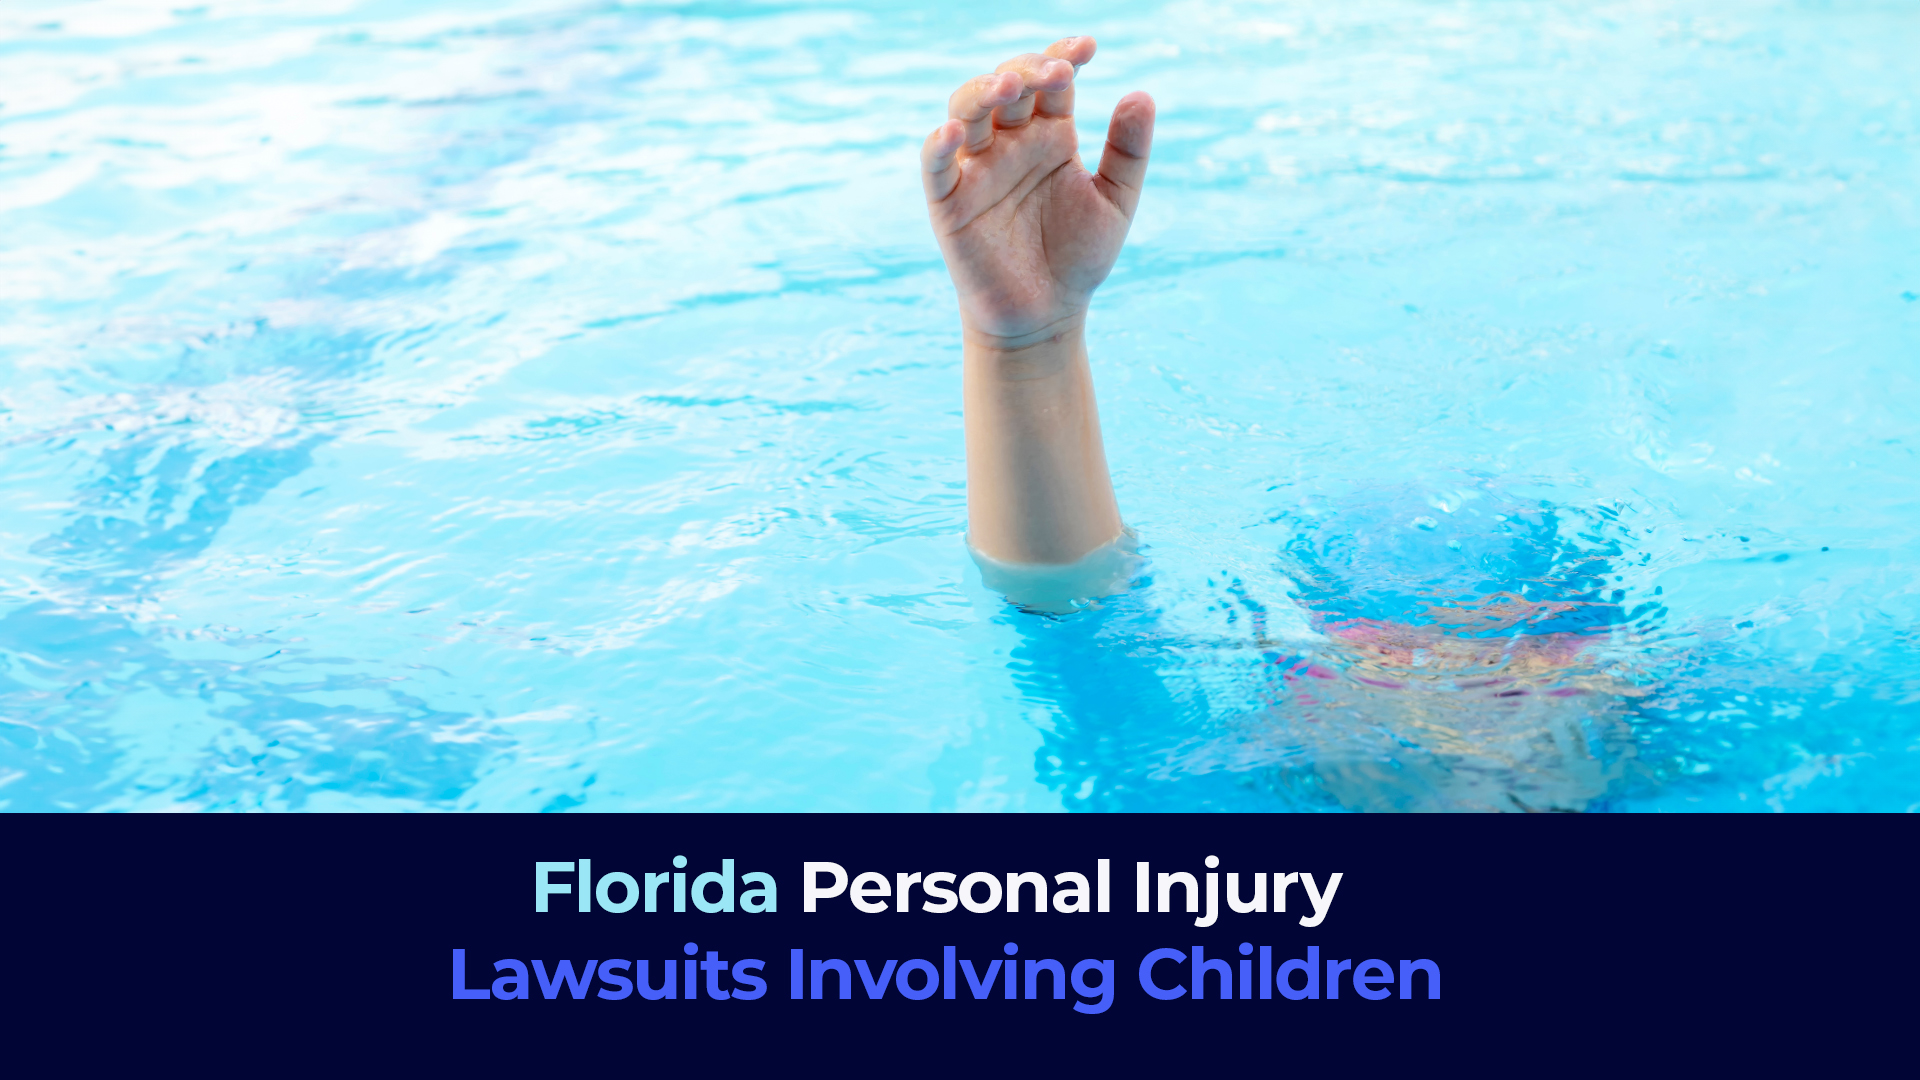 A picture of a child showing his hand above the water in a pool with the title "Florida Personal Injury Lawsuits Involving Children"